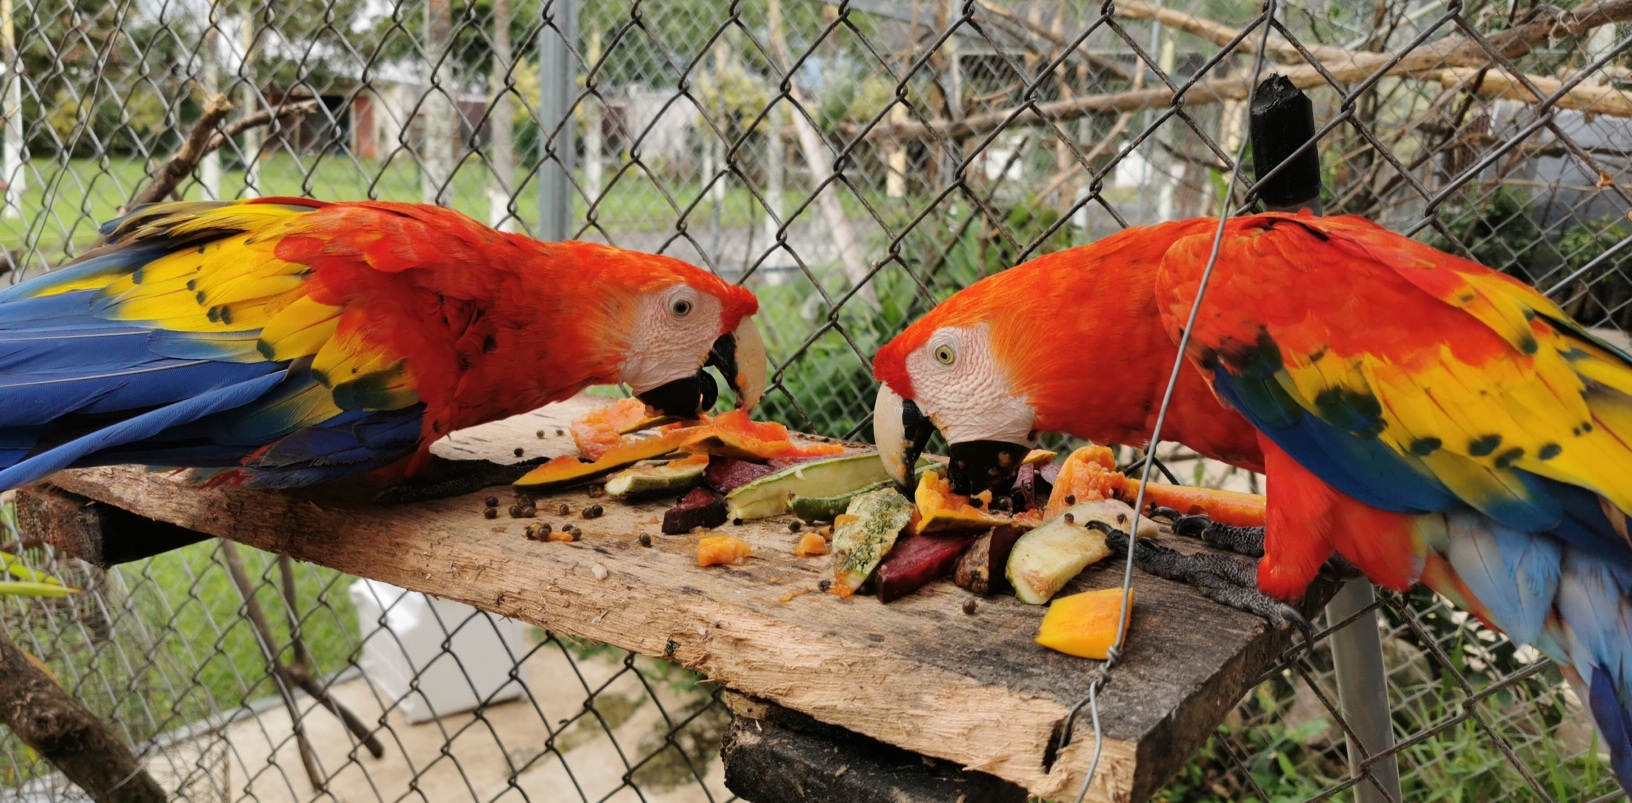 Scarlet macaws being fed.